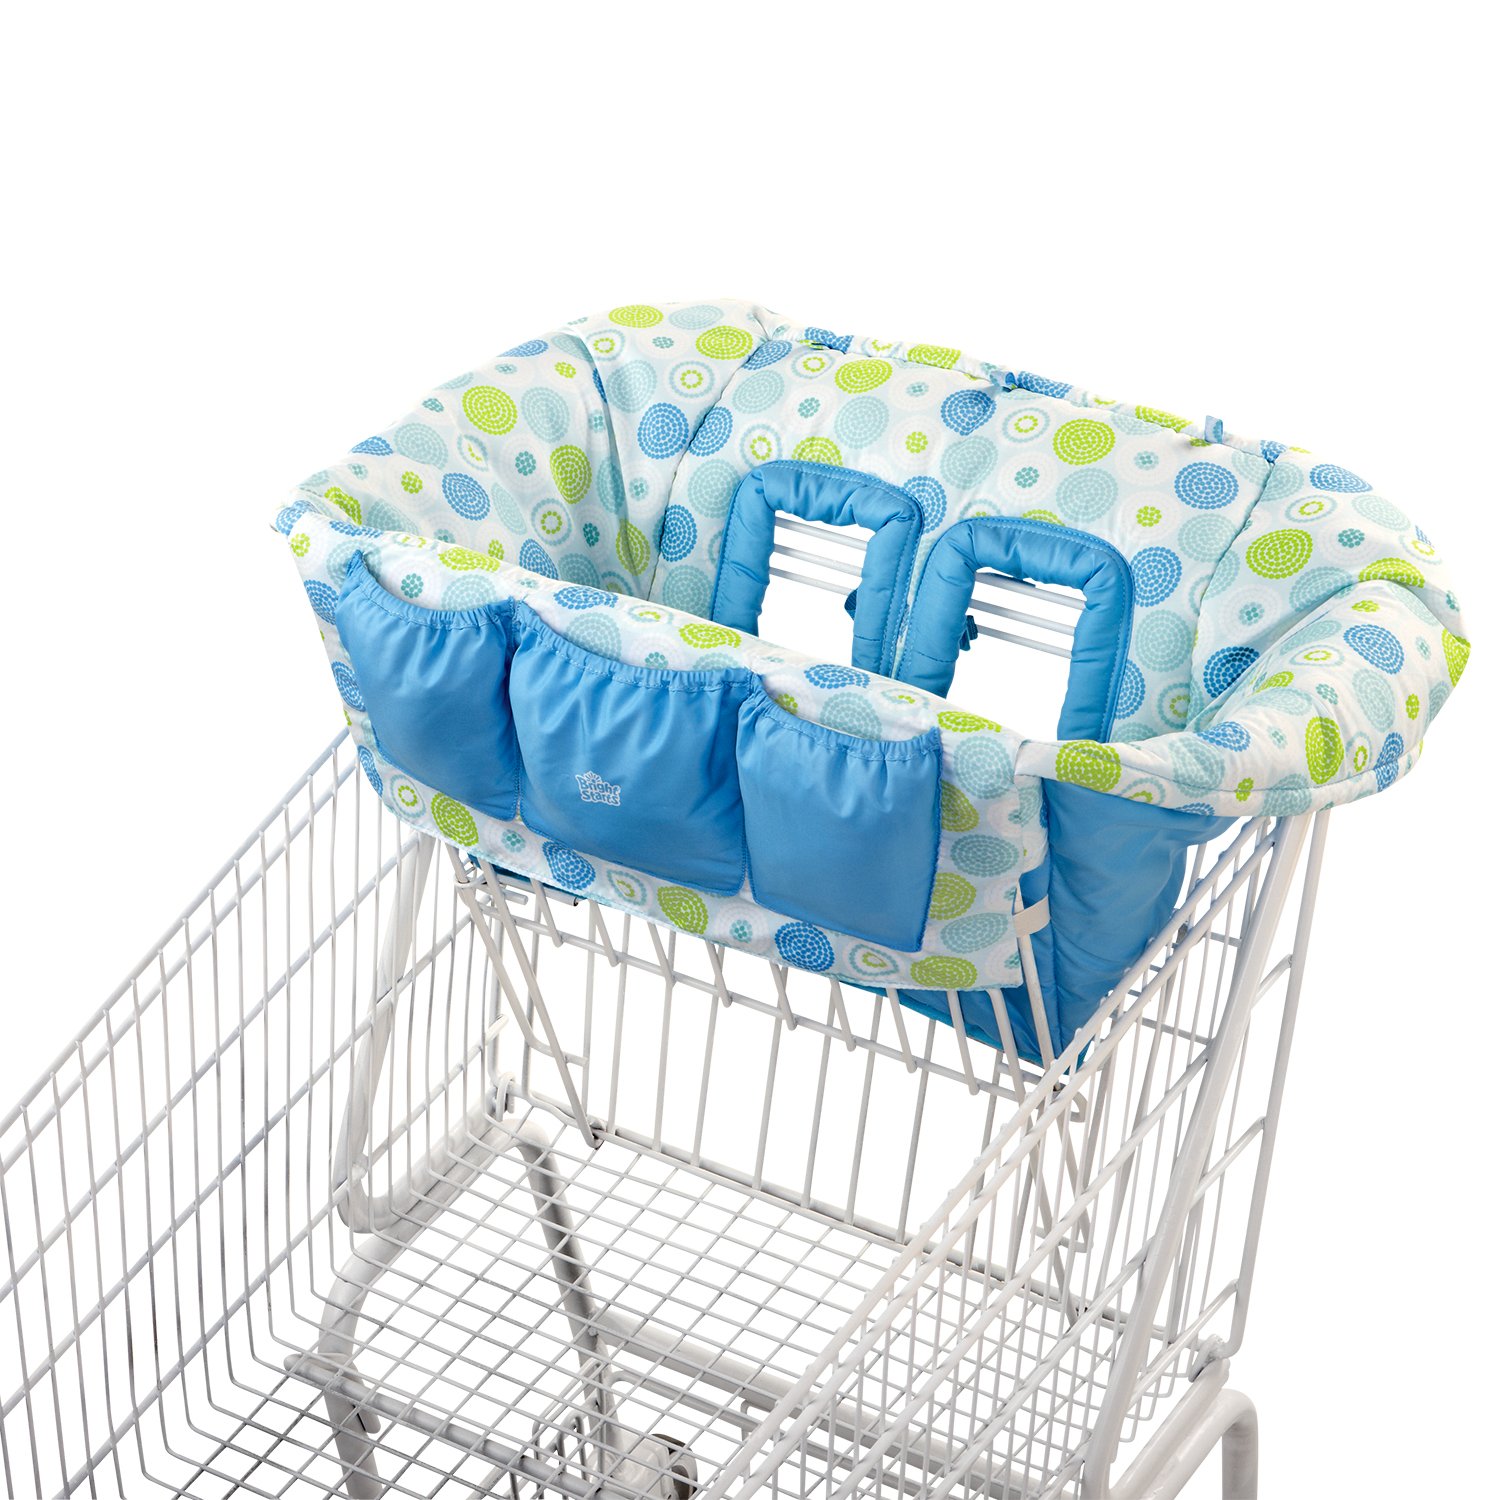 Grocery Cart Cover Walmart